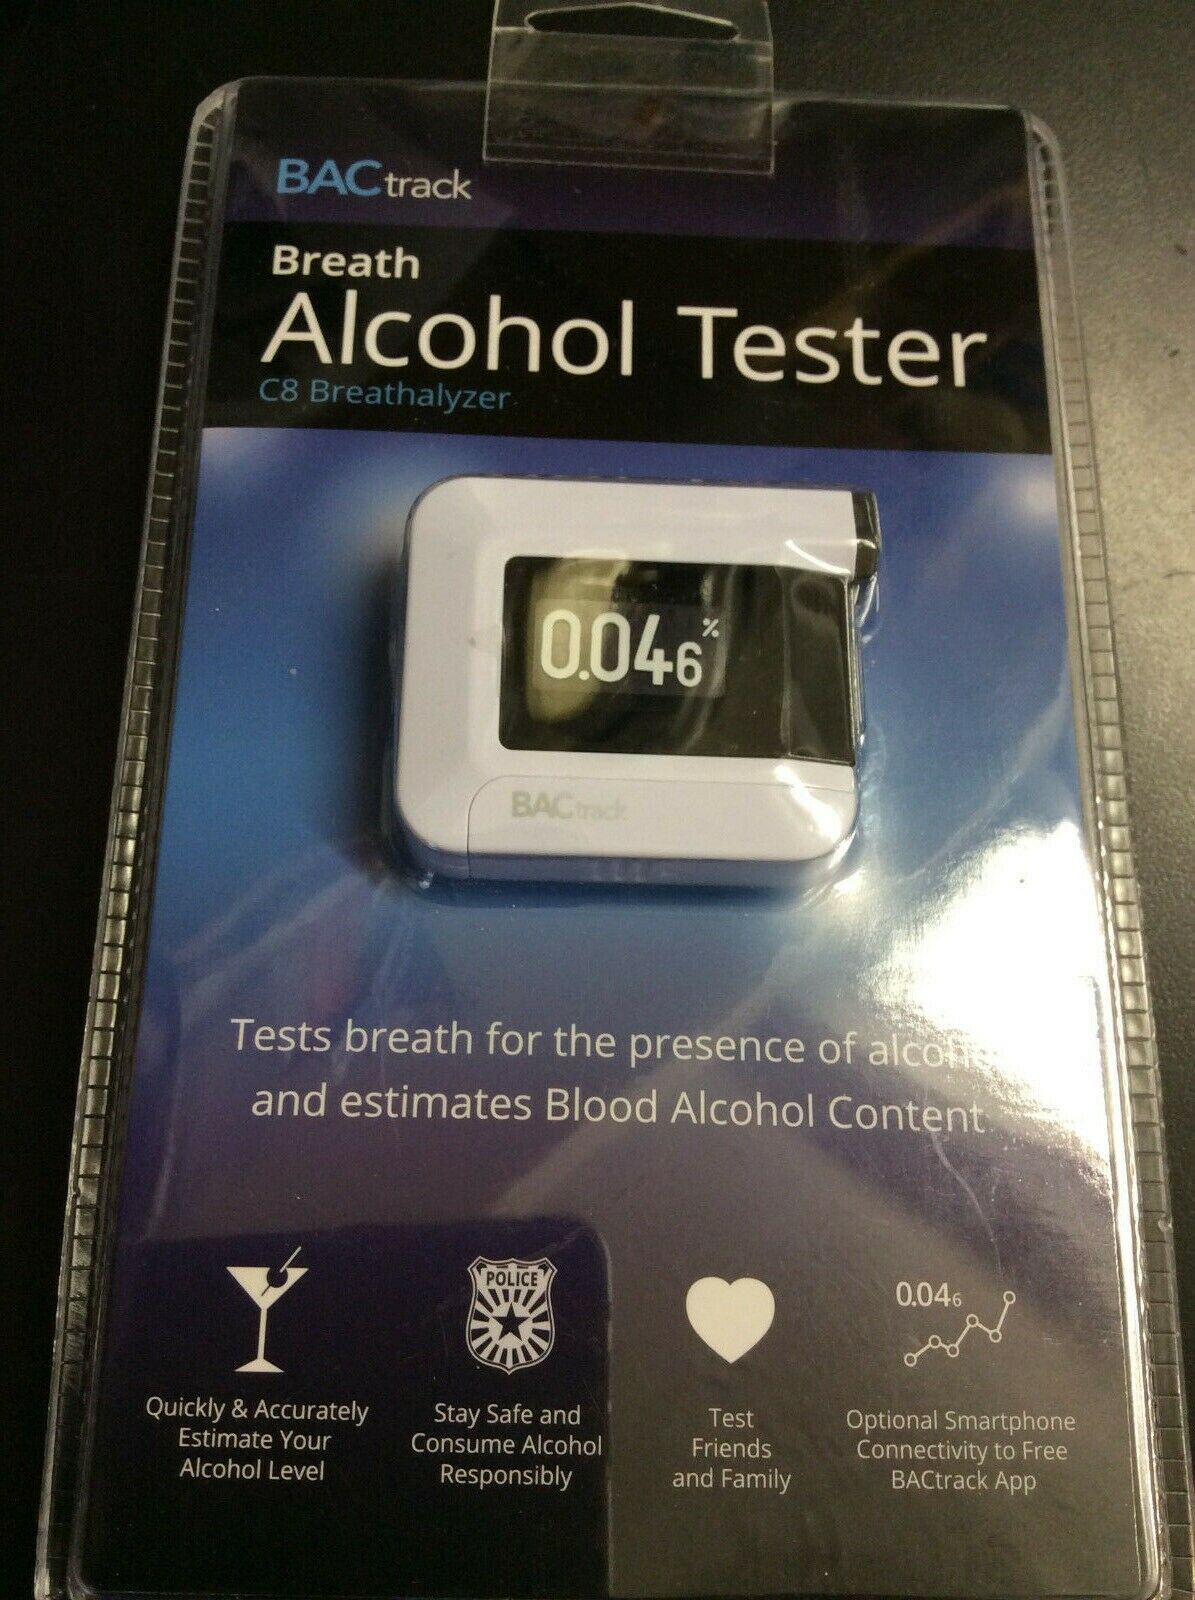 Bactrack C8 Breathalyzer Breath Alcohol Tester Wireless Connectivity #5554